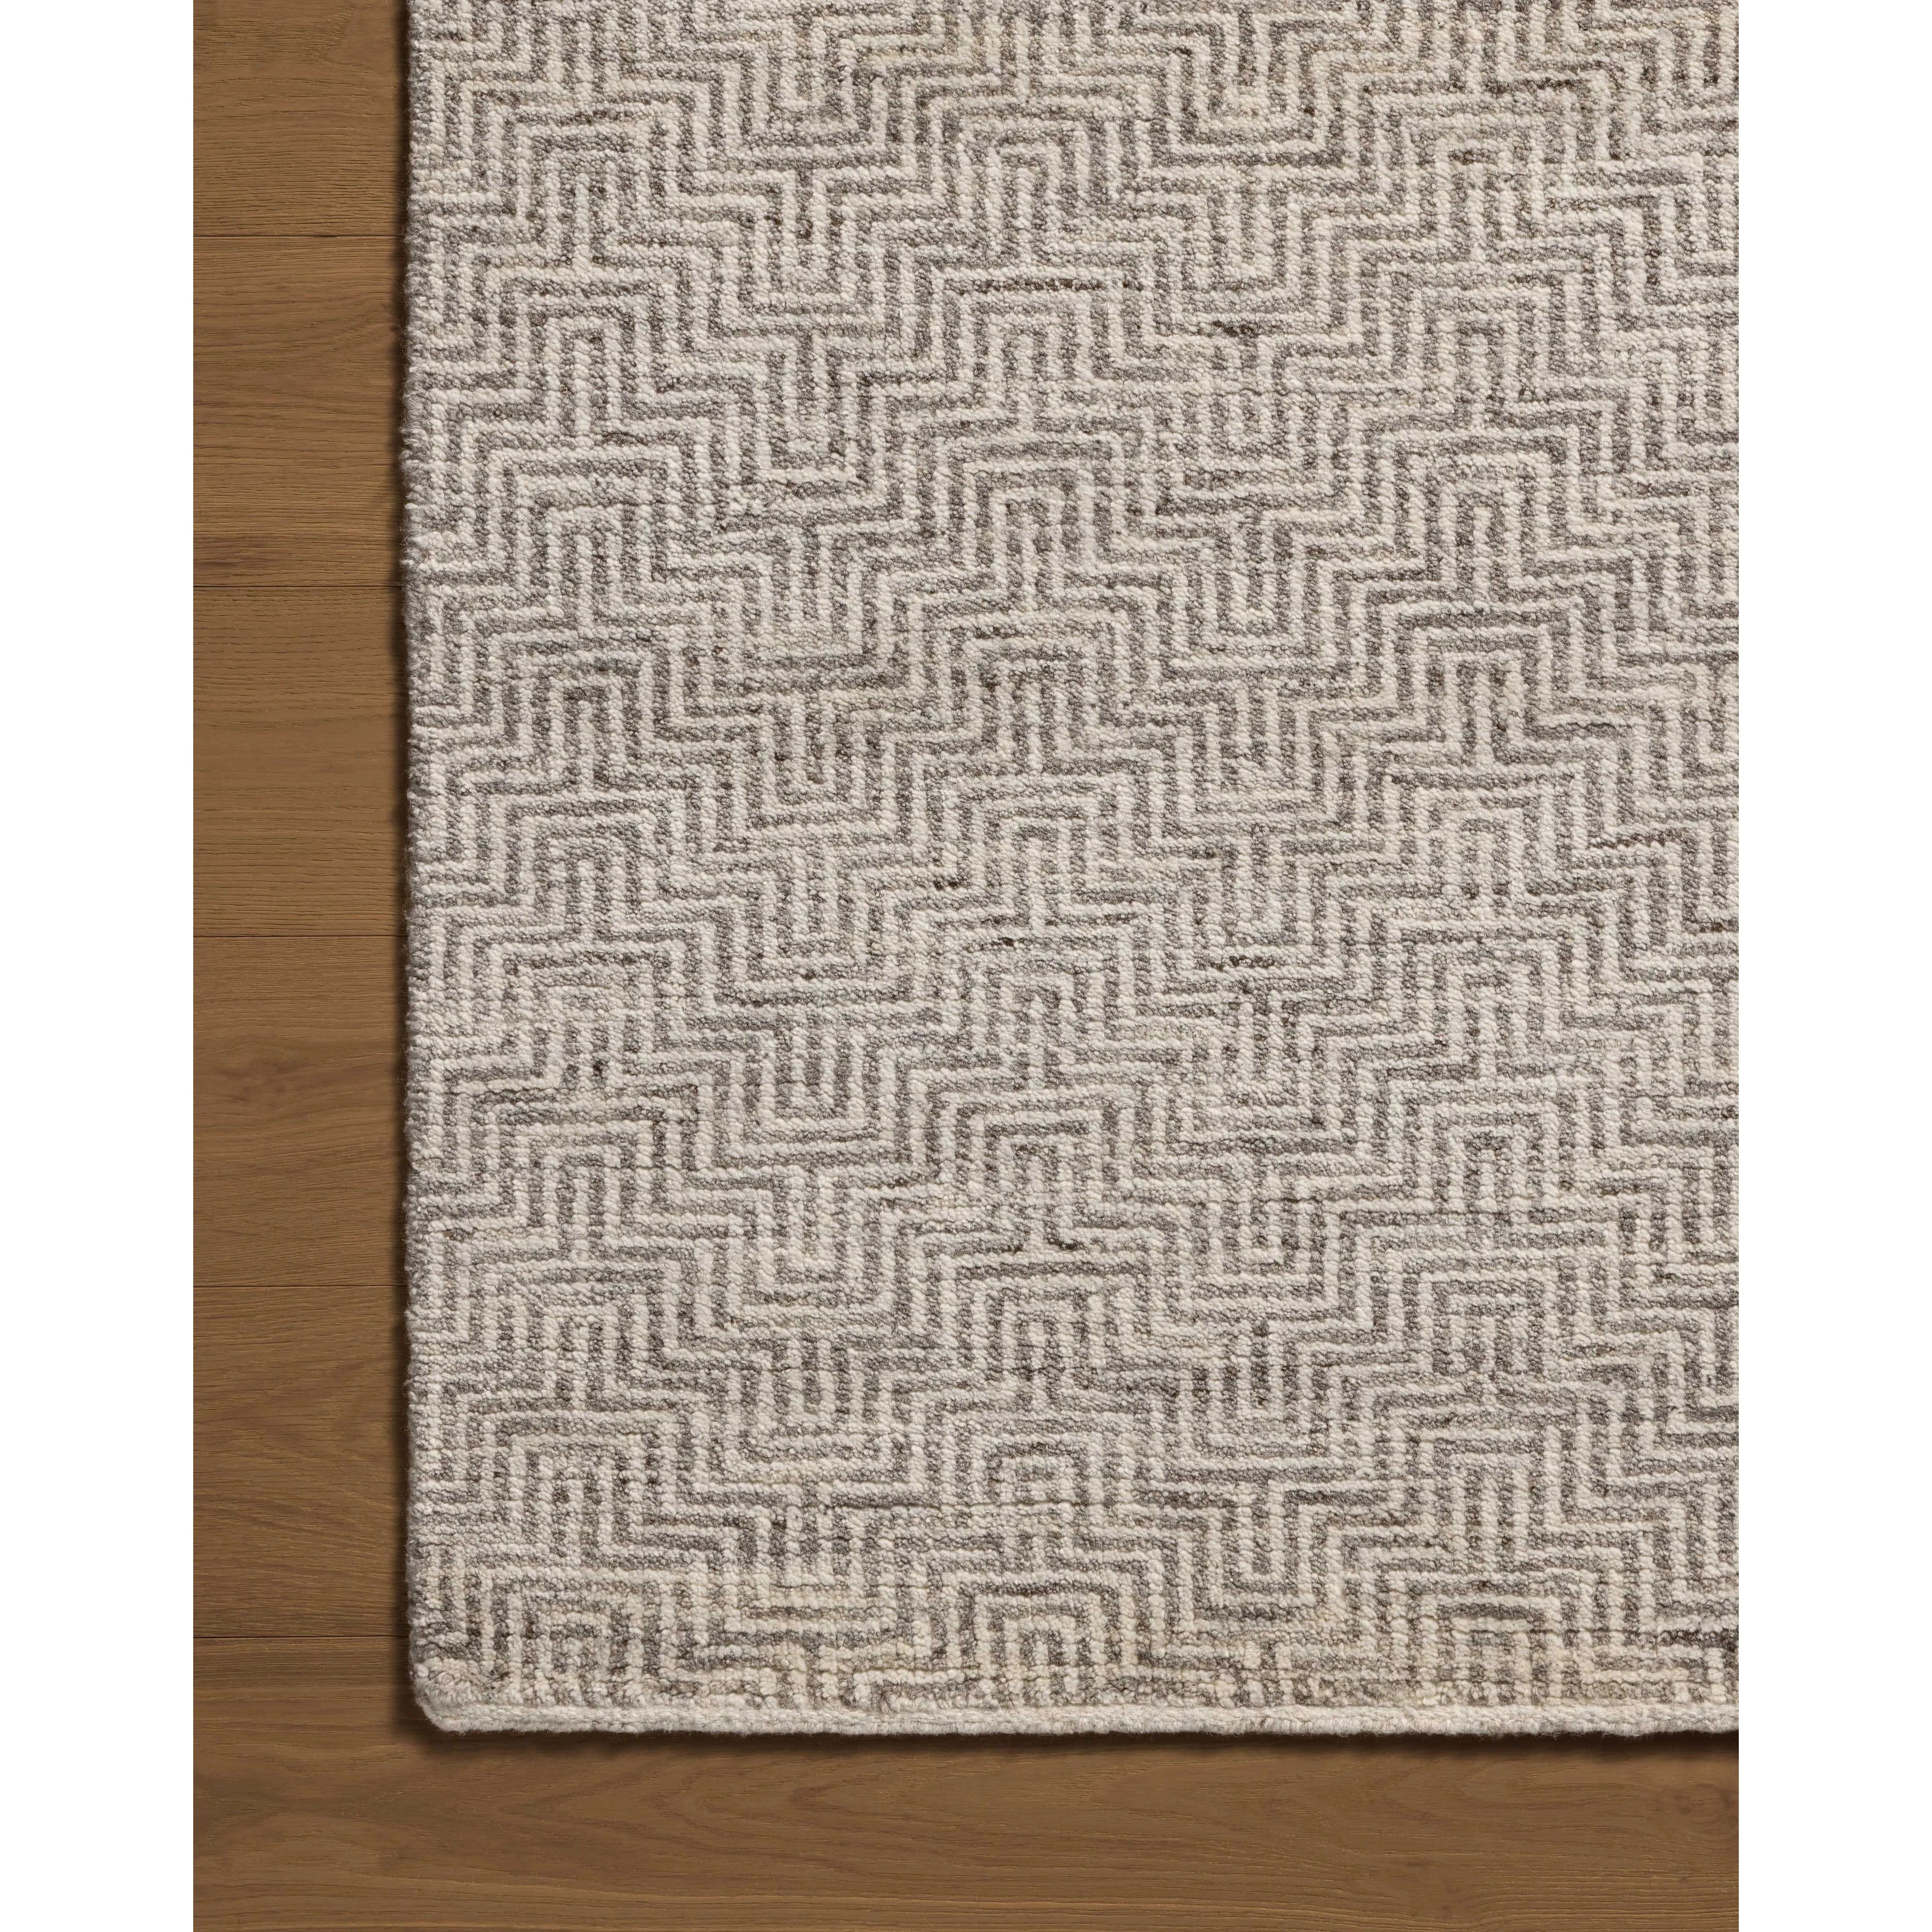 The Grace Dove Rug is a hand-knotted area rug with patterns inspired by traditional suiting fabrics, like houndstooth and tweed. The design’s smaller-scale patterns create depth, while the classic patterns invoke the warmth of English countryside interiors. Amethyst Home provides interior design, new home construction design consulting, vintage area rugs, and lighting in the Newport Beach metro area.